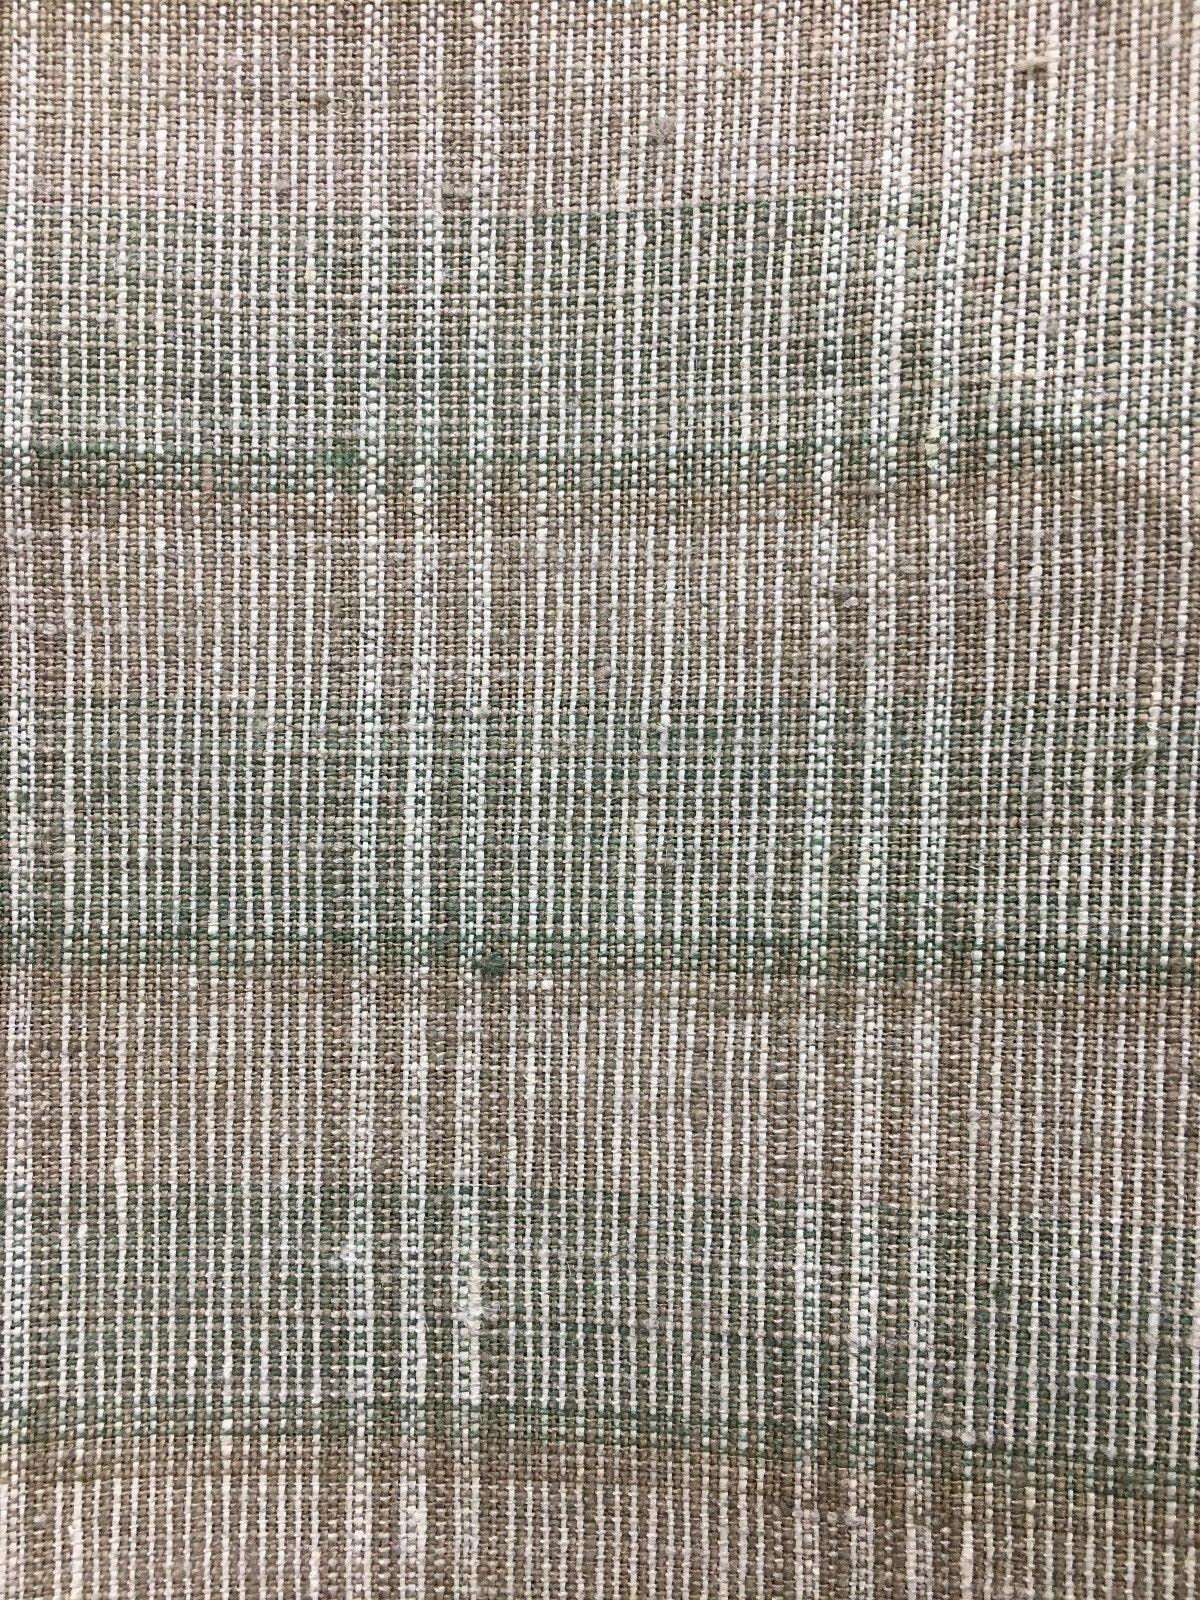 Beige Green Brown Plaid 100% Linen Fabric (60 in.) 20 Yards